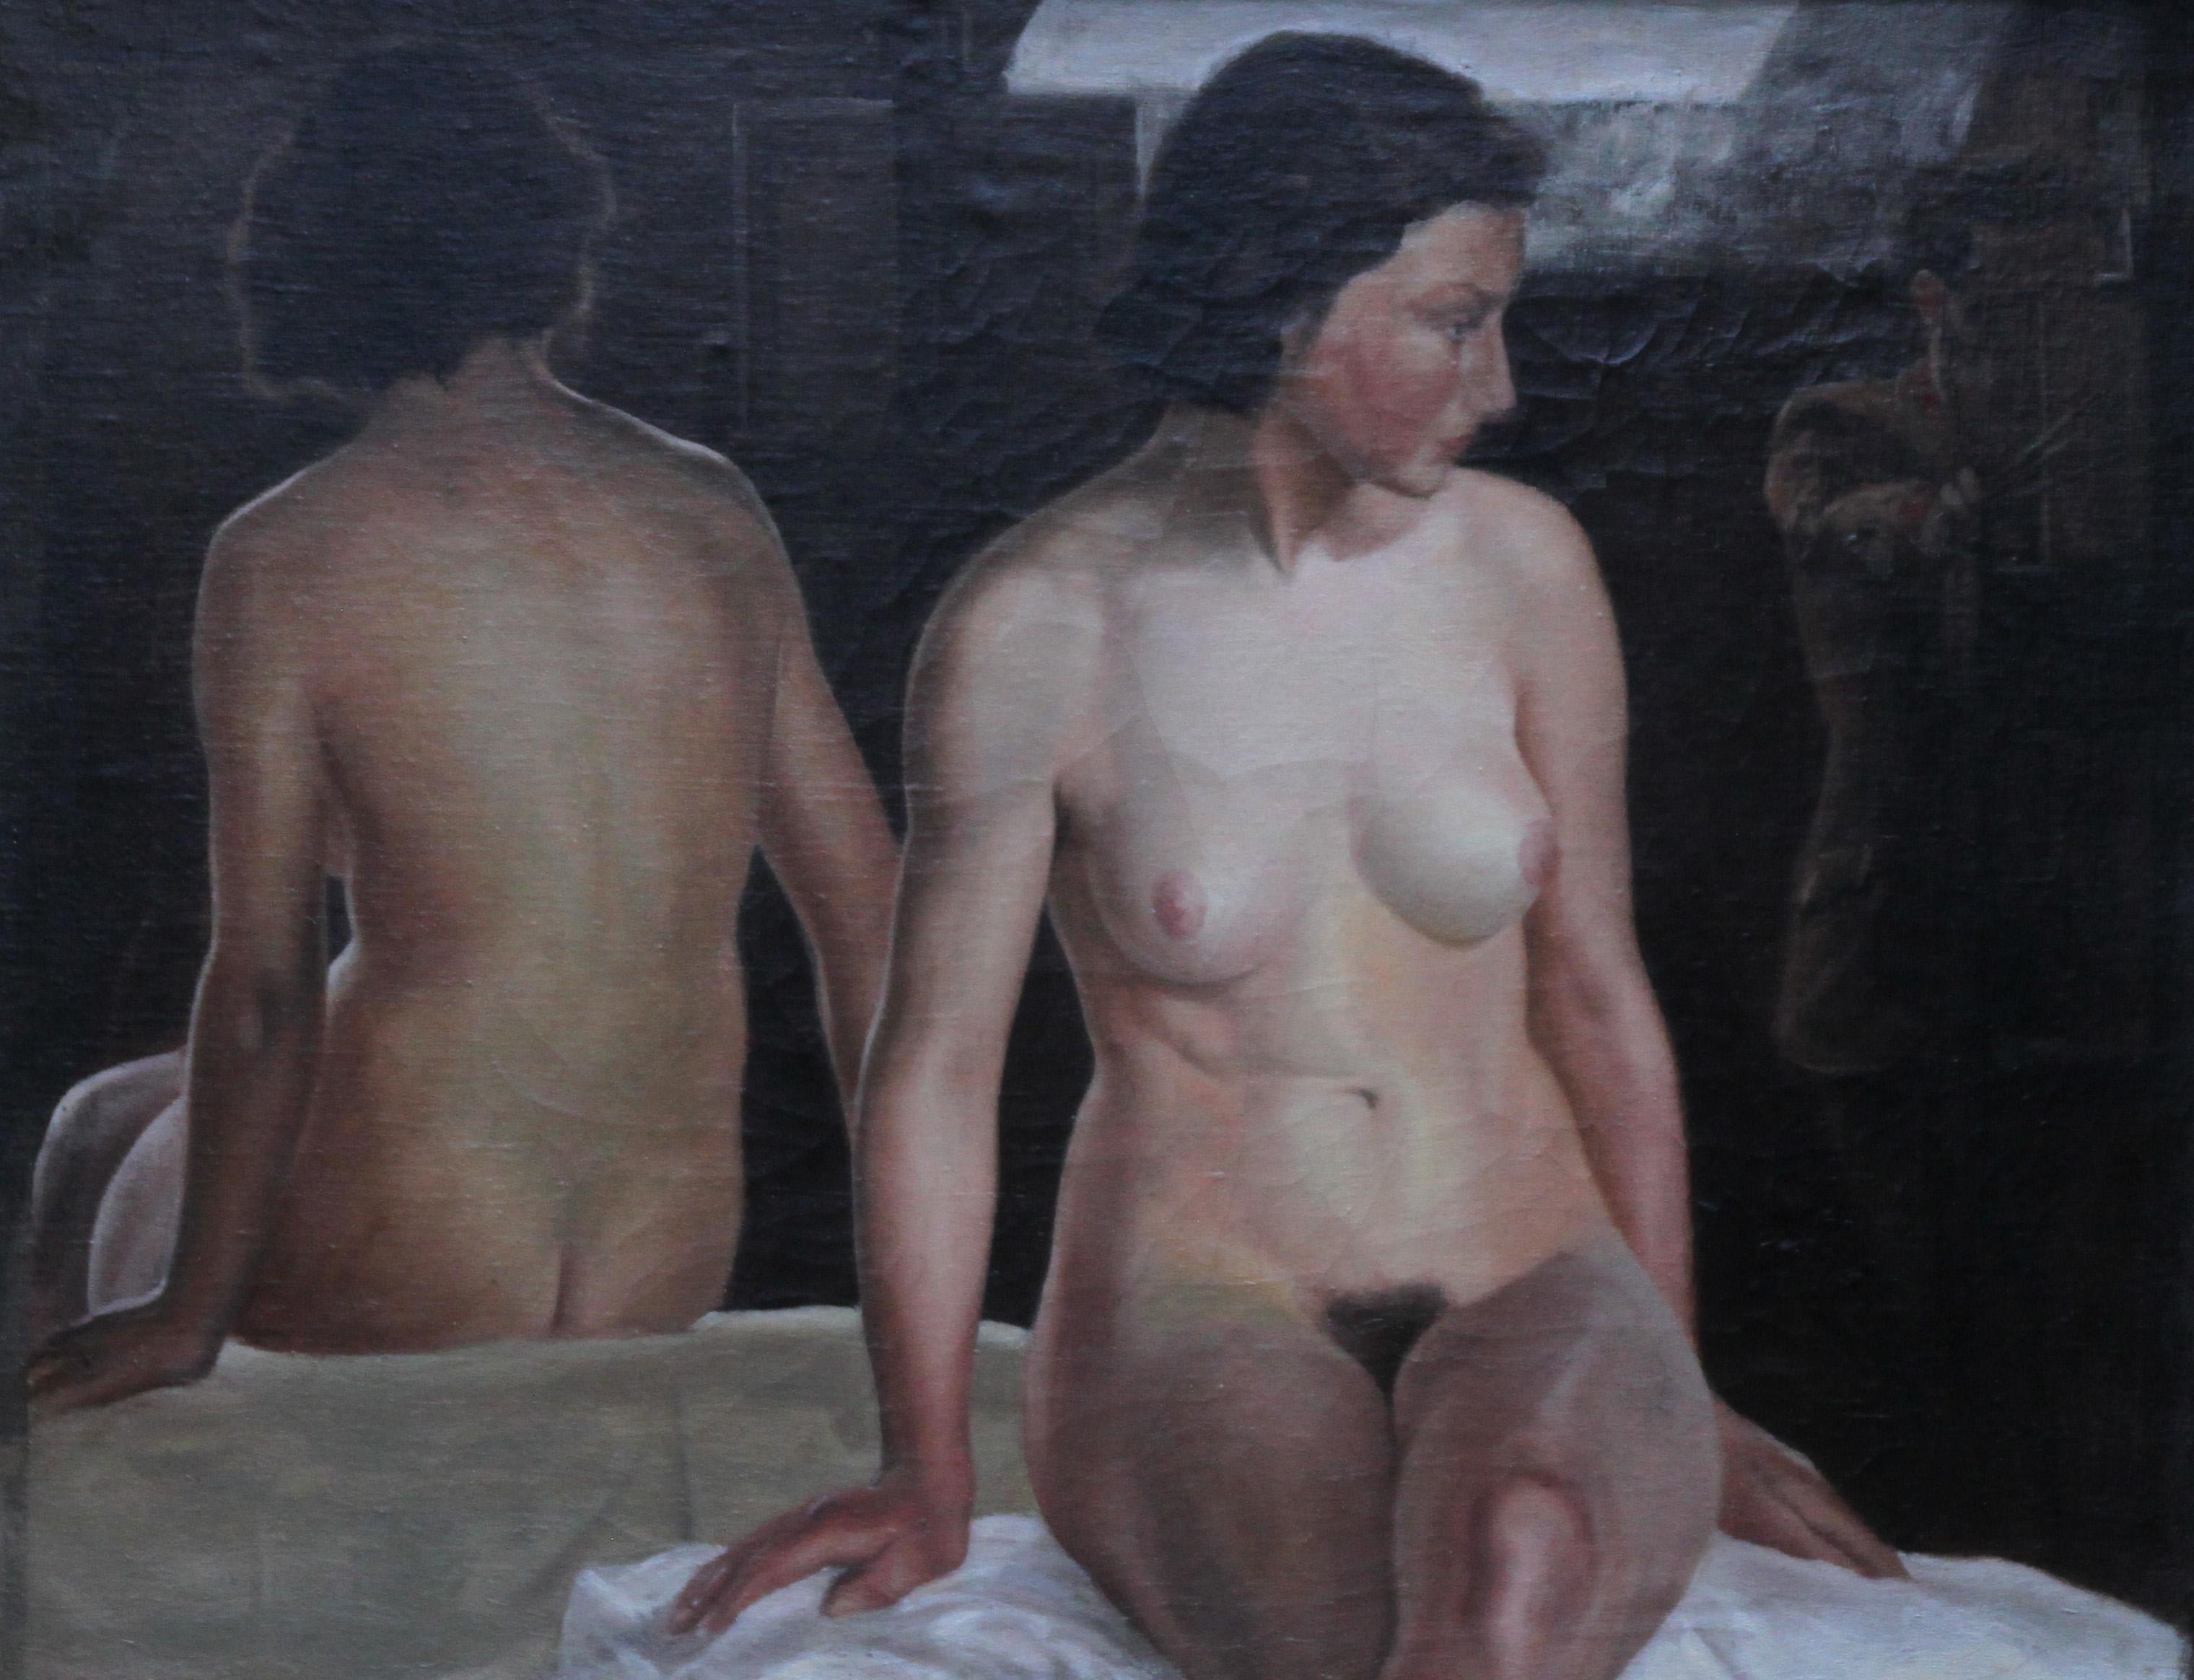 Reflected Female Nude with Artist - British Slade Sch 30's portrait oil painting - Painting by Stanley Spencer (circle)